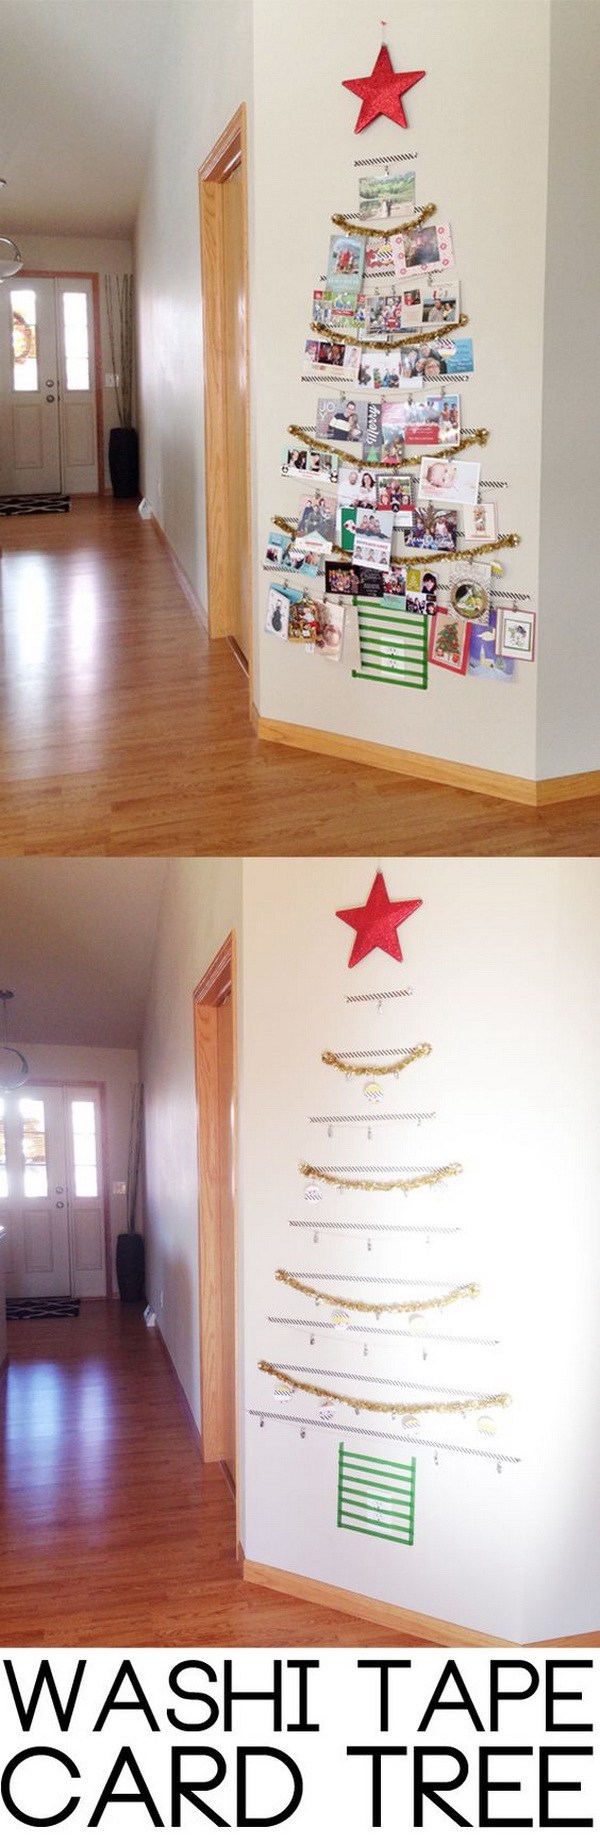 15 Simple and Easy Last Minute DIY Christmas Decorations You Must See